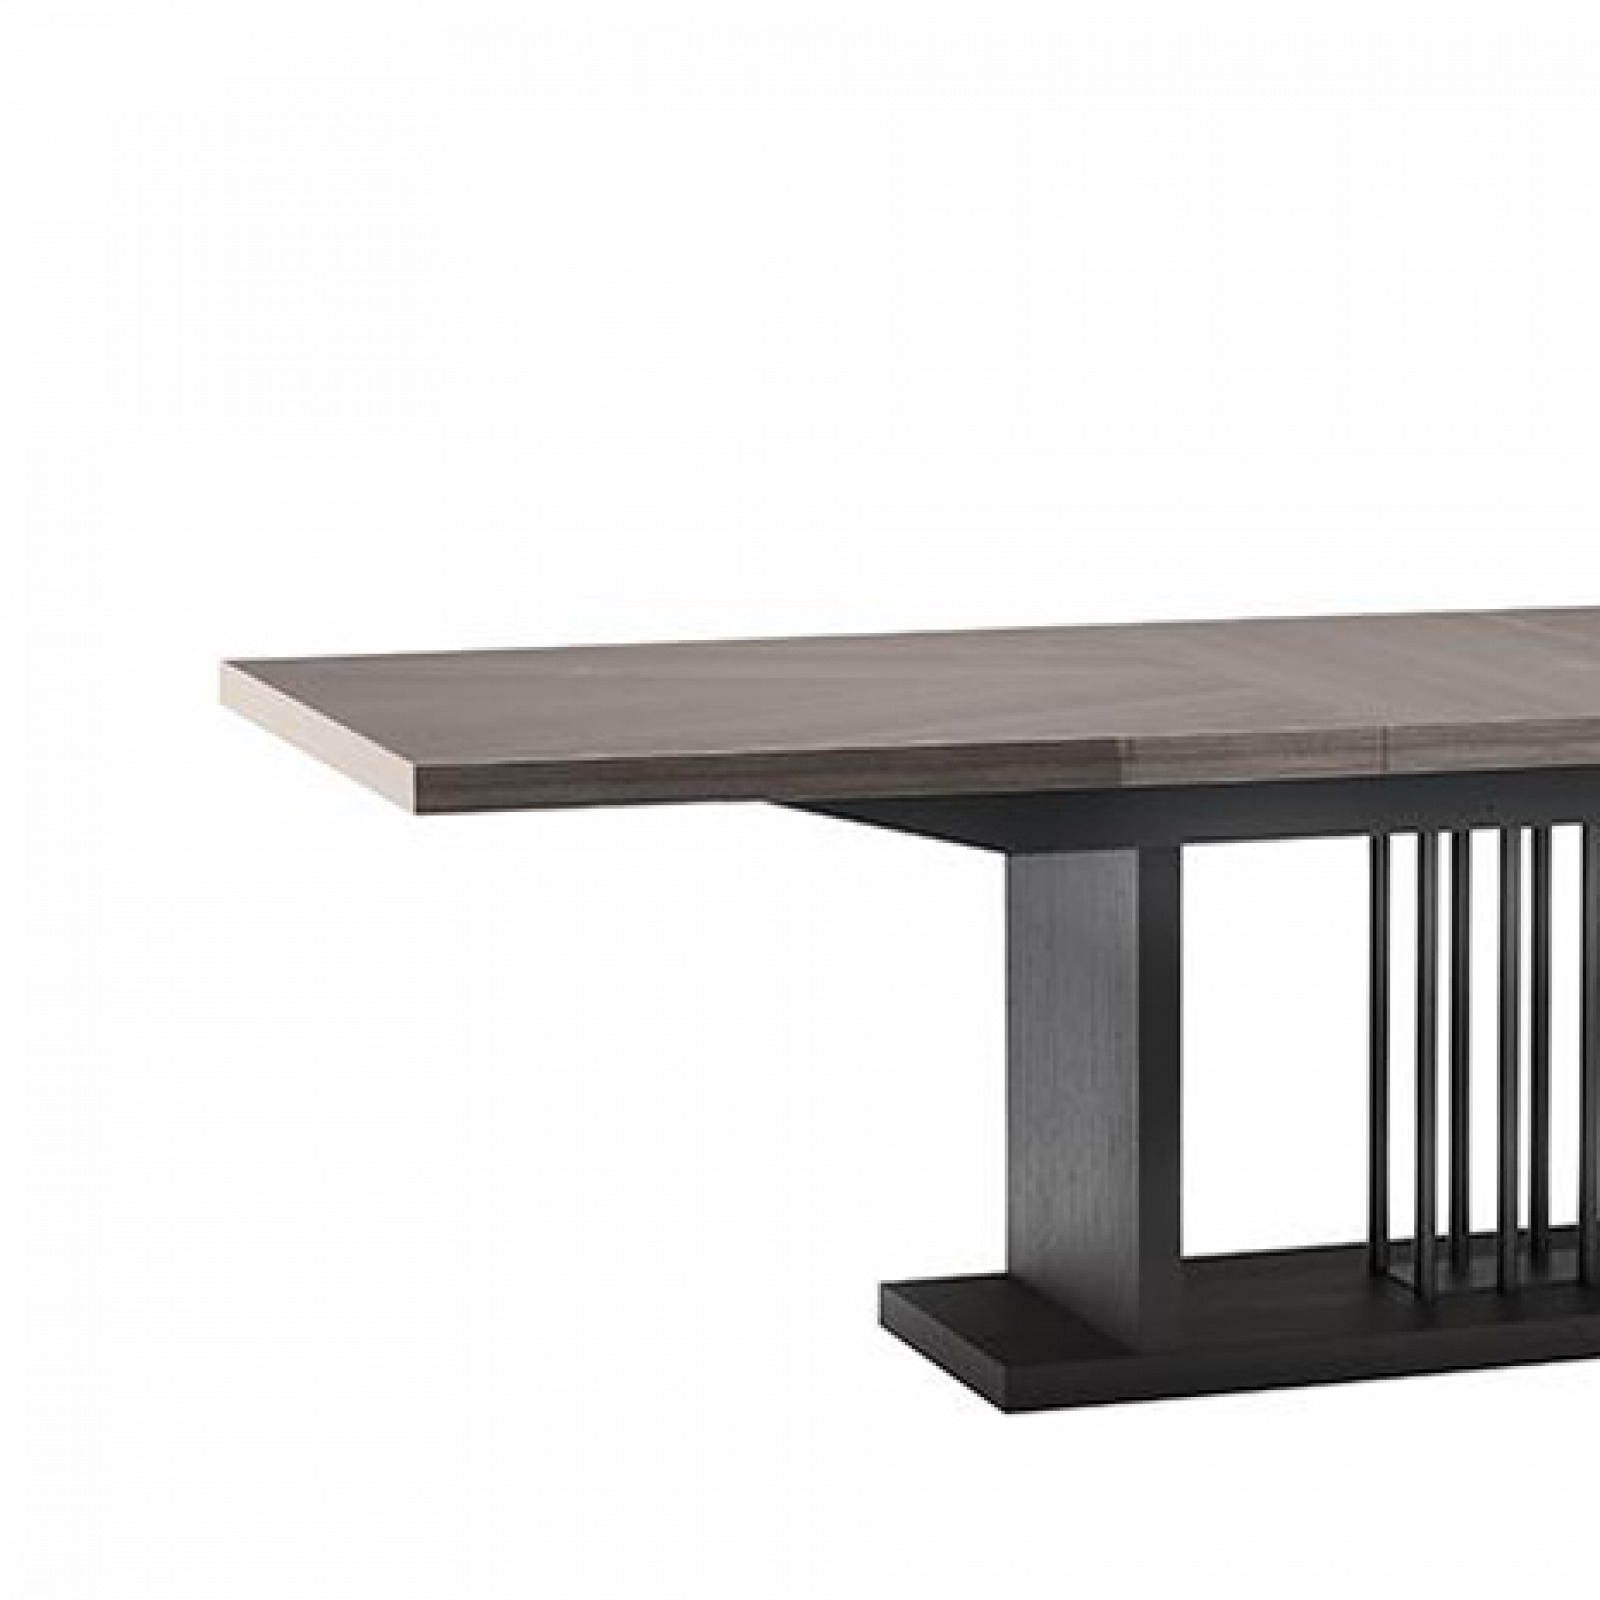 Olimpia dining table